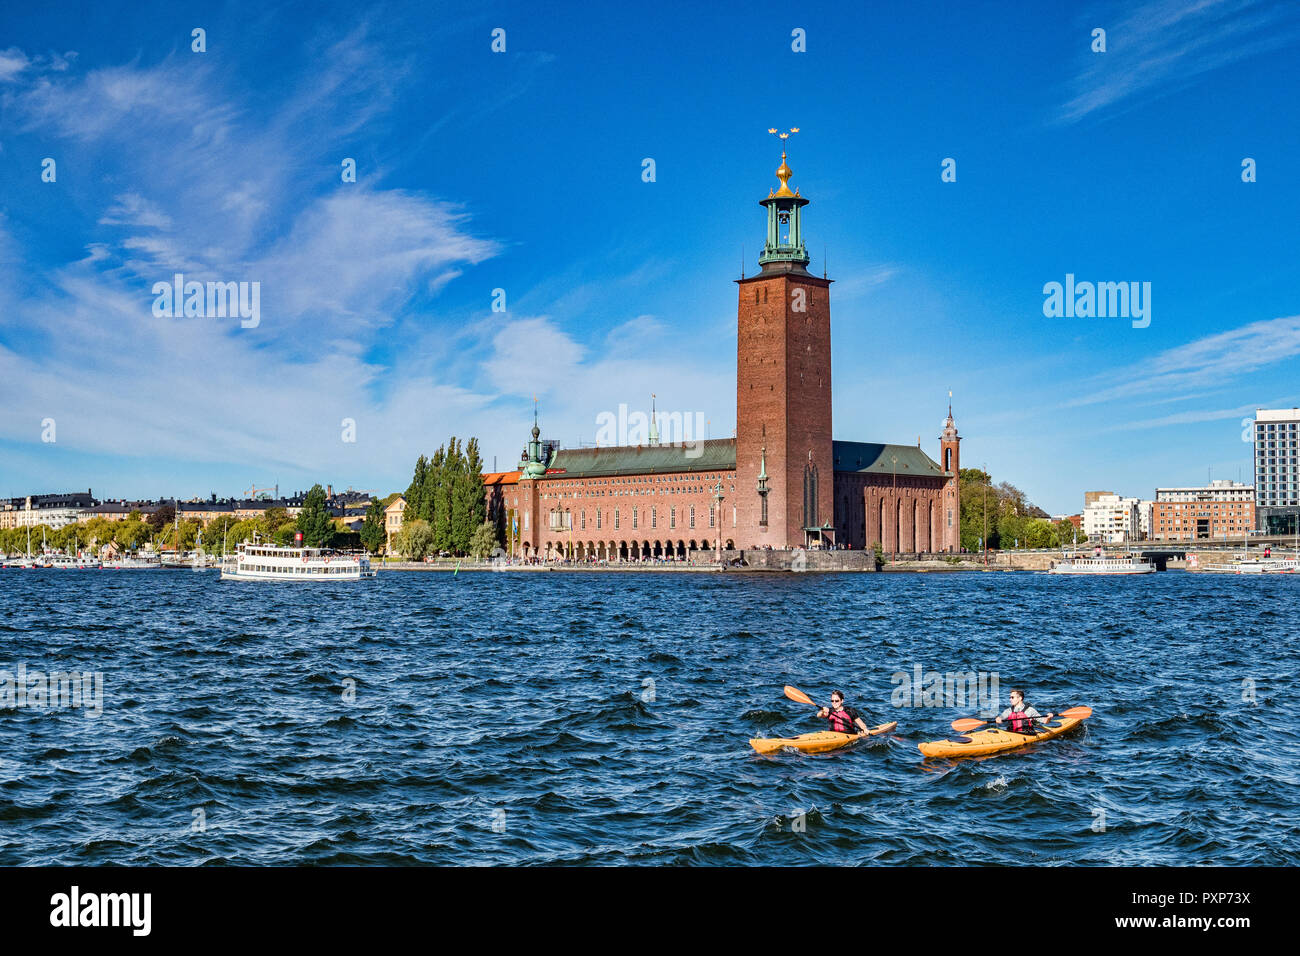 16 September 2018: Stockholm, Sweden - The City Hall, location of the Nobel Banquet, and two kayaks in the water. Stock Photo